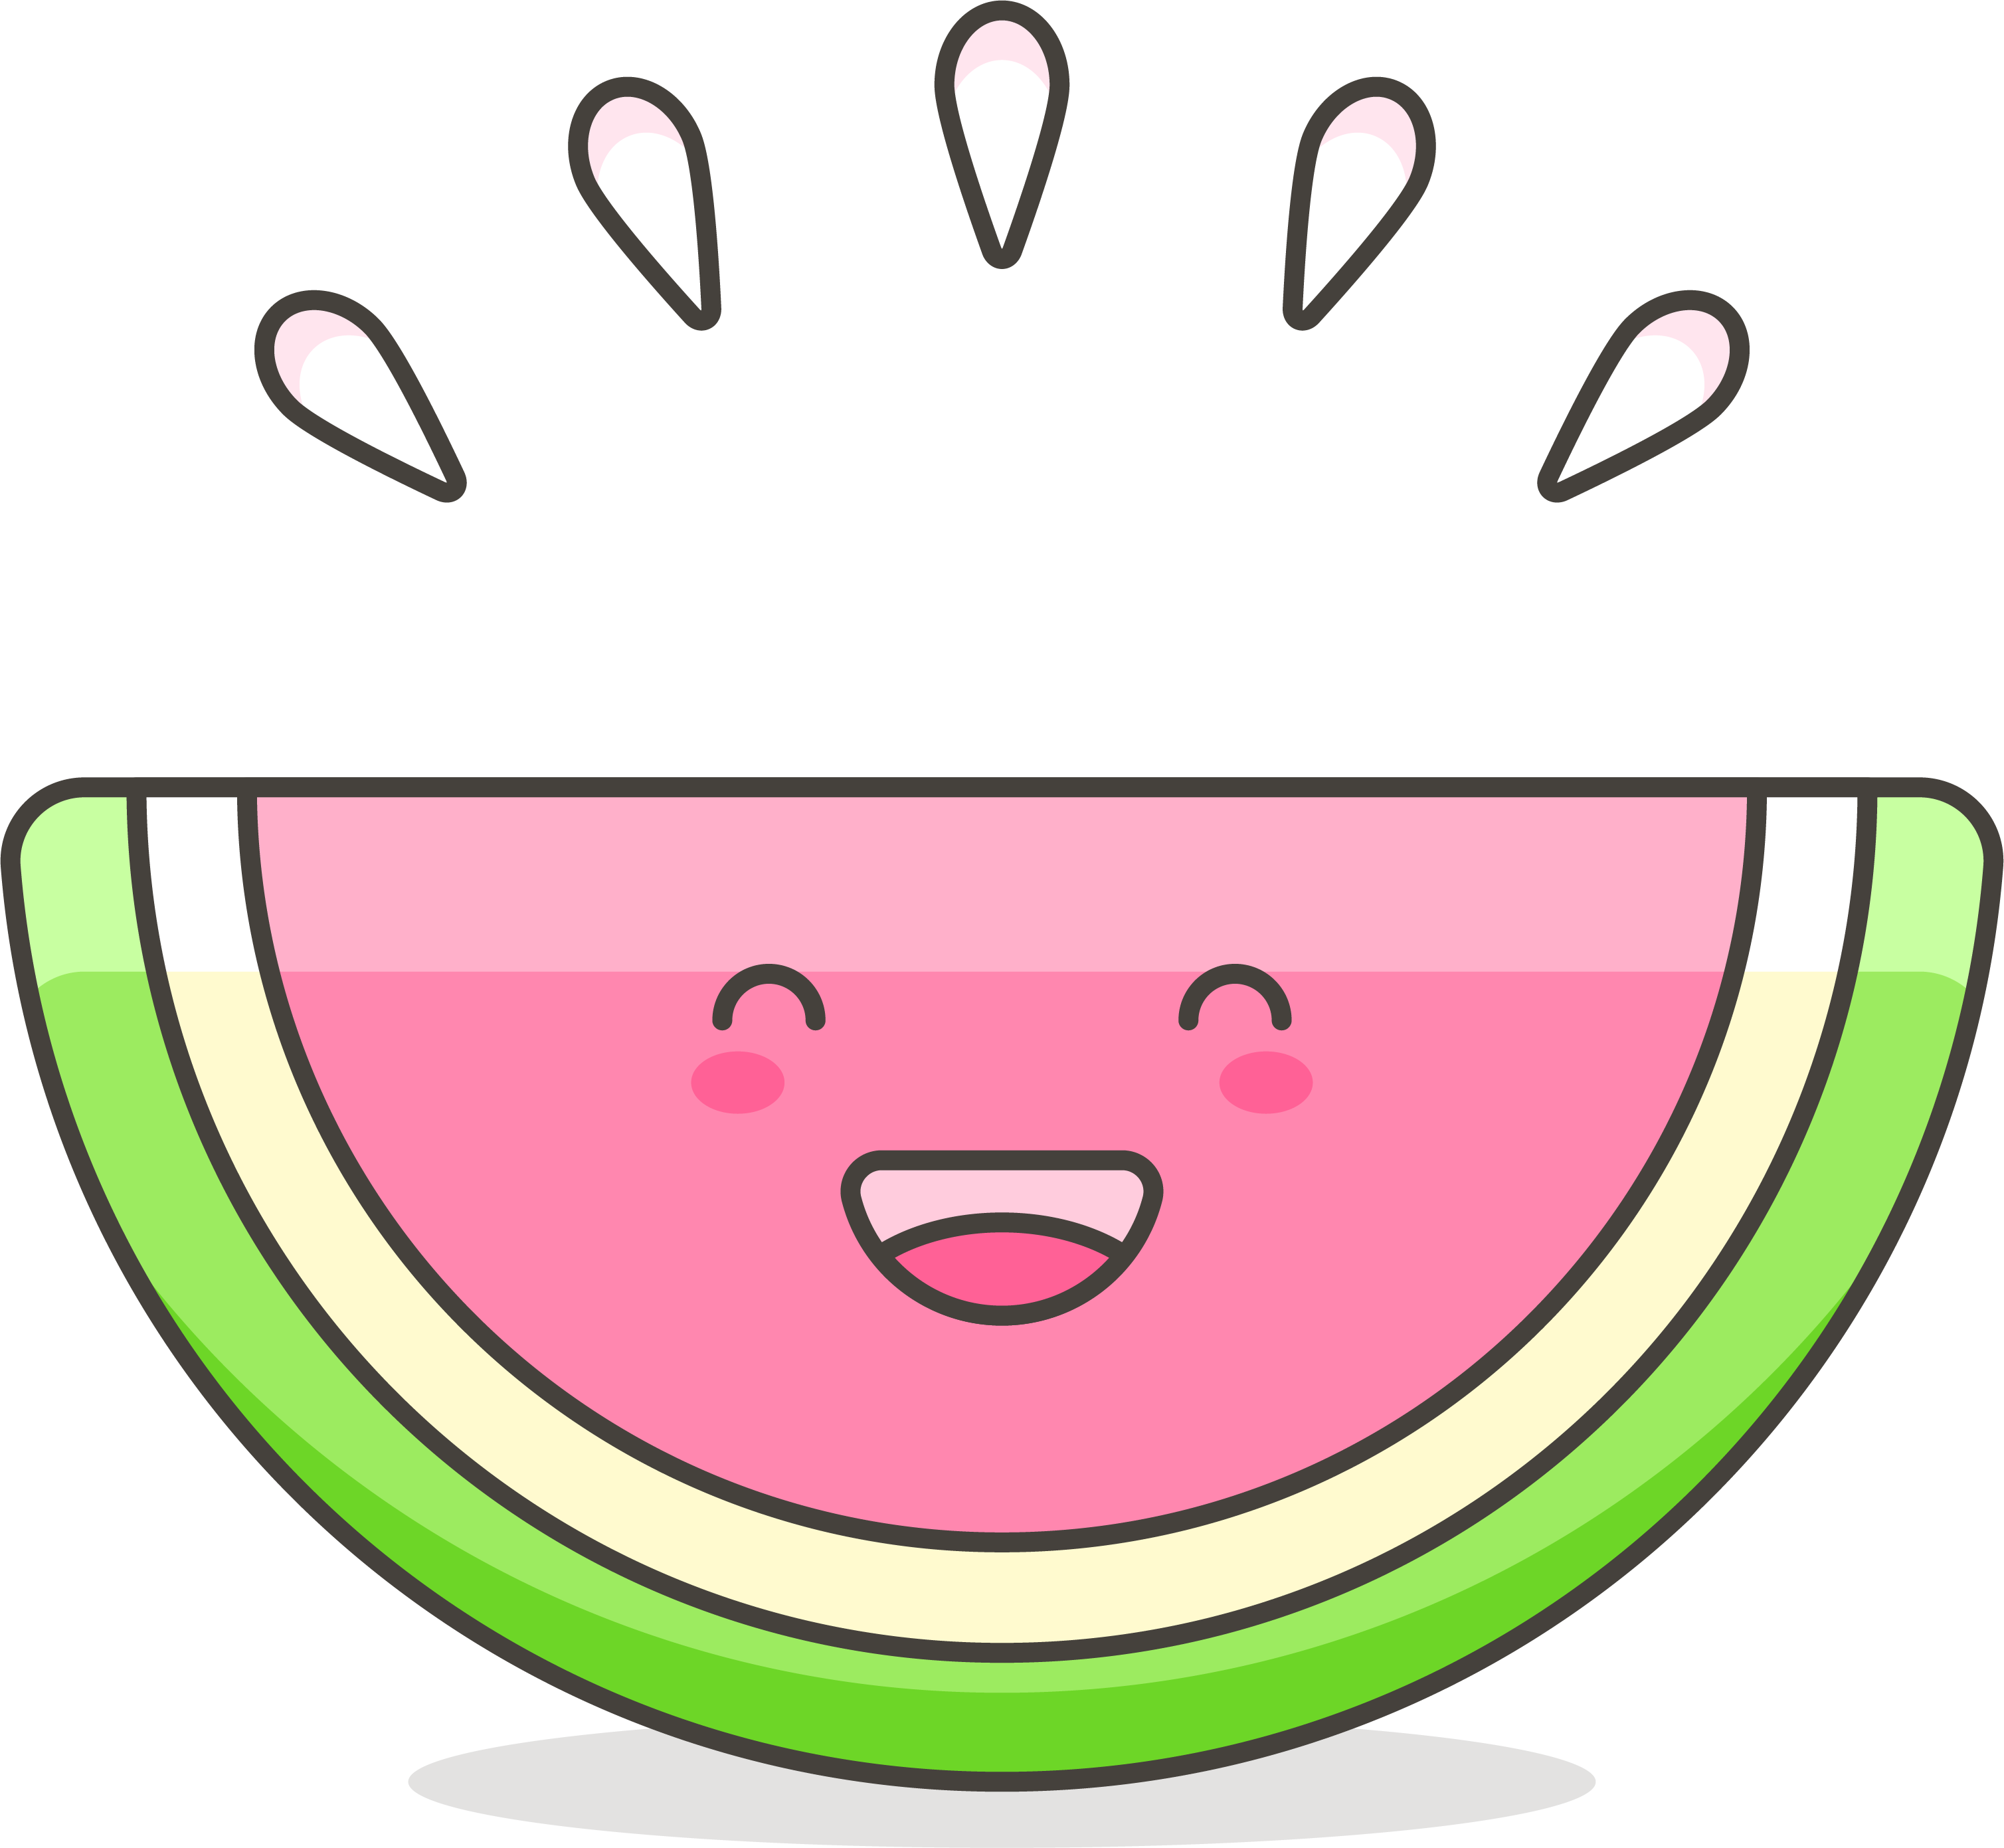 Watermelon clipart happy cartoon. Mouth free on dumielauxepices